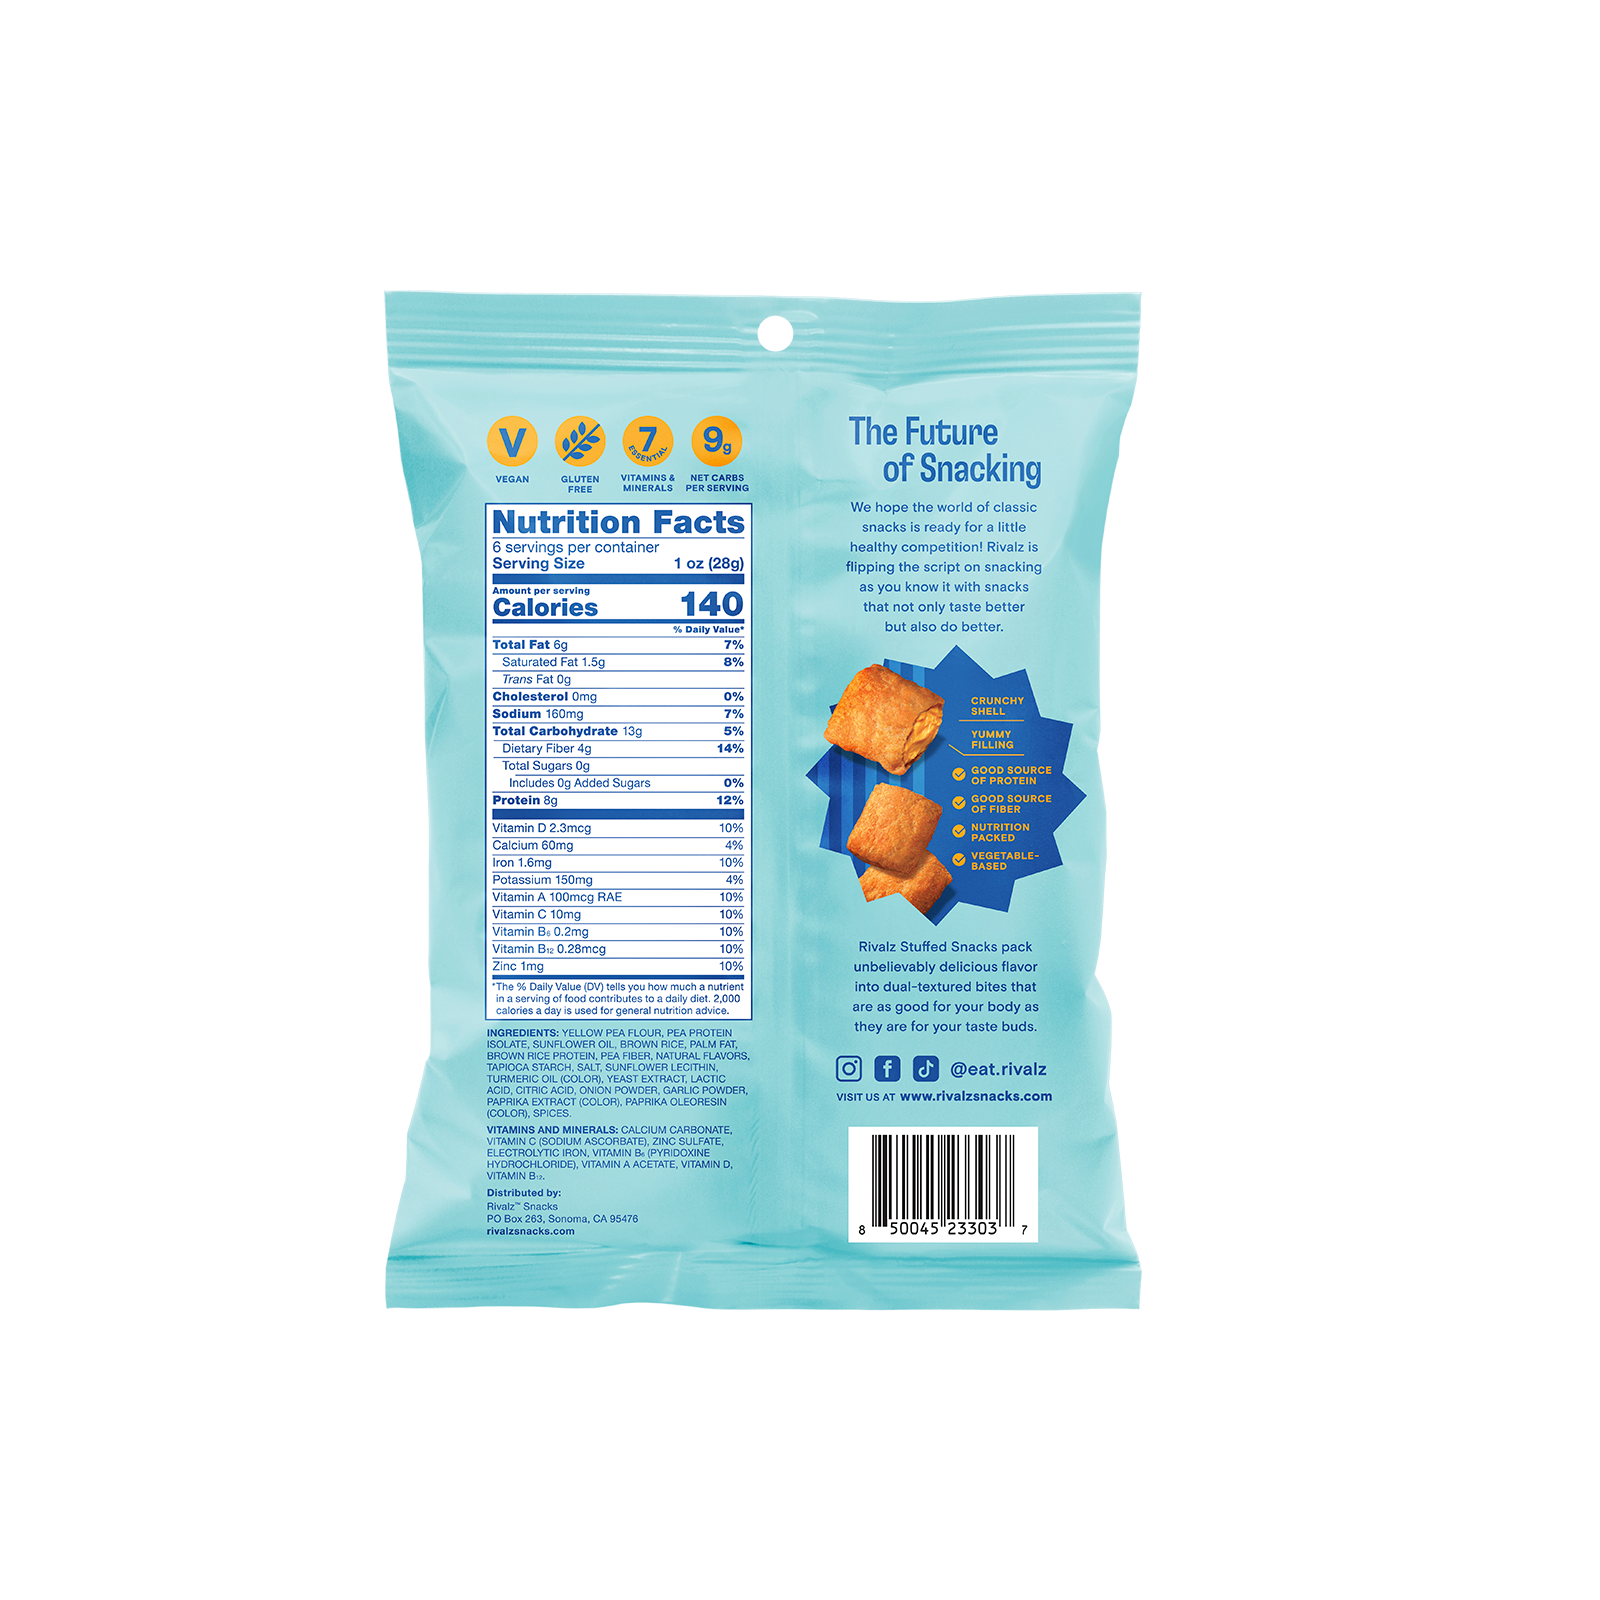 Back of a 1 oz bag of Rivalz Snacks Extra Chedda Mac gluten free and plant based snacks